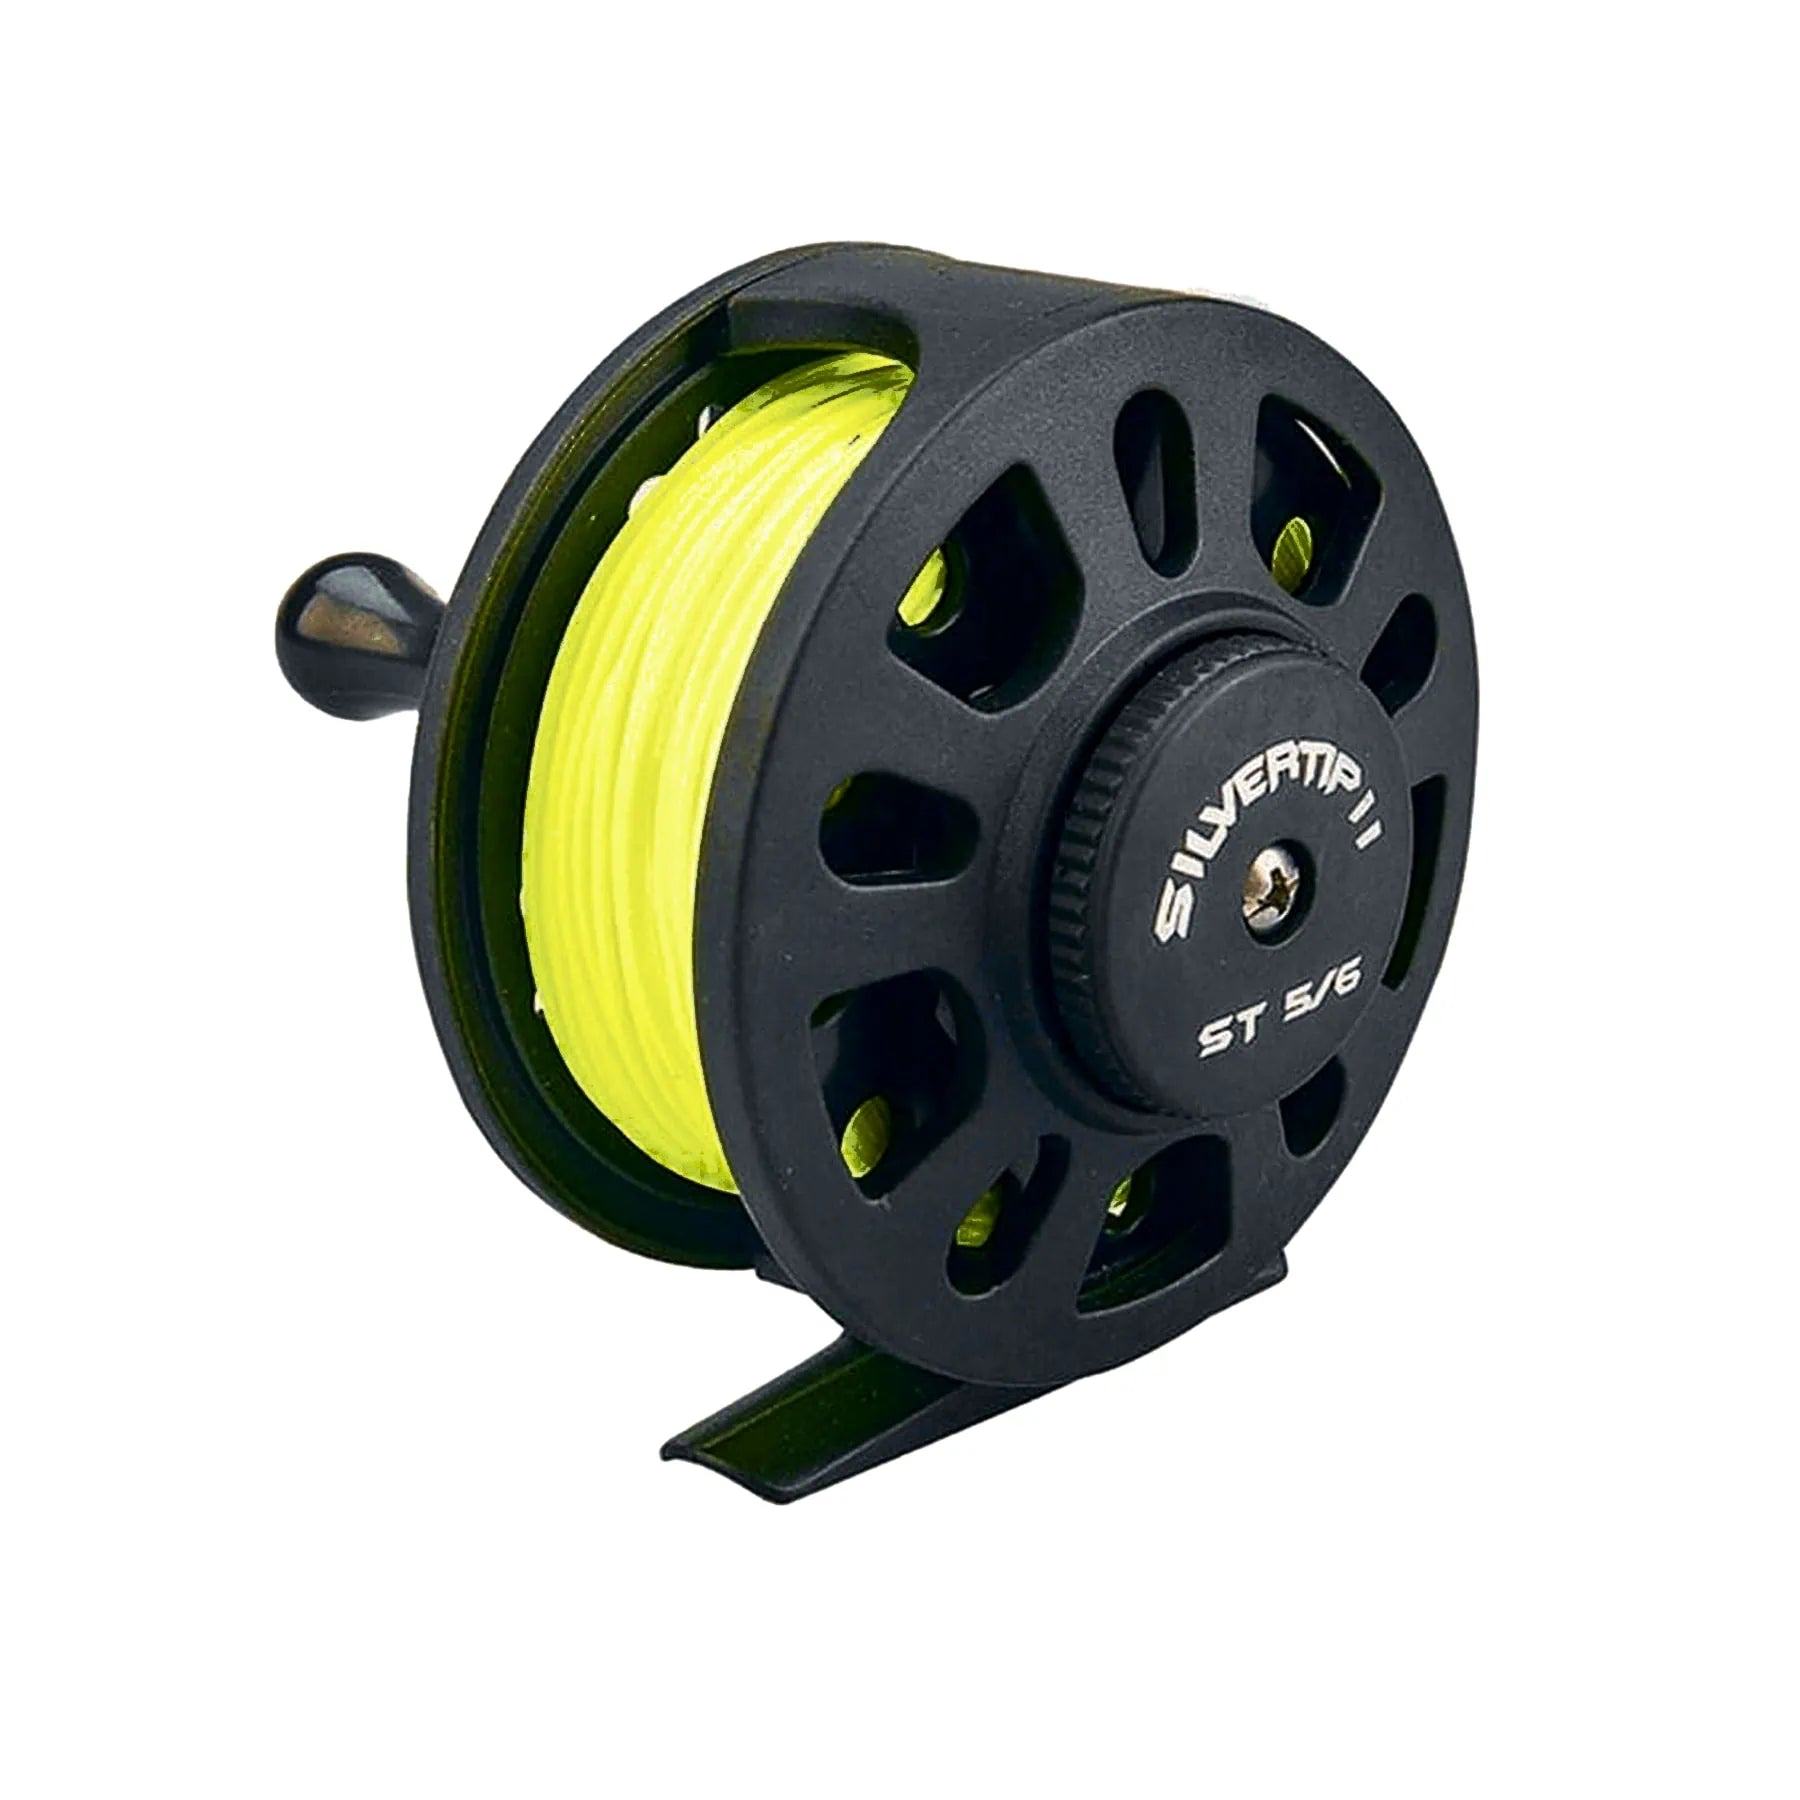  SEIWEI Fly Fishing Reel, Fly Reel GLA 5/6WT Large Capacity  Plastic Fishing Reel with 30m Nylon Line, for Basic Fishing Lines Black :  Sports & Outdoors